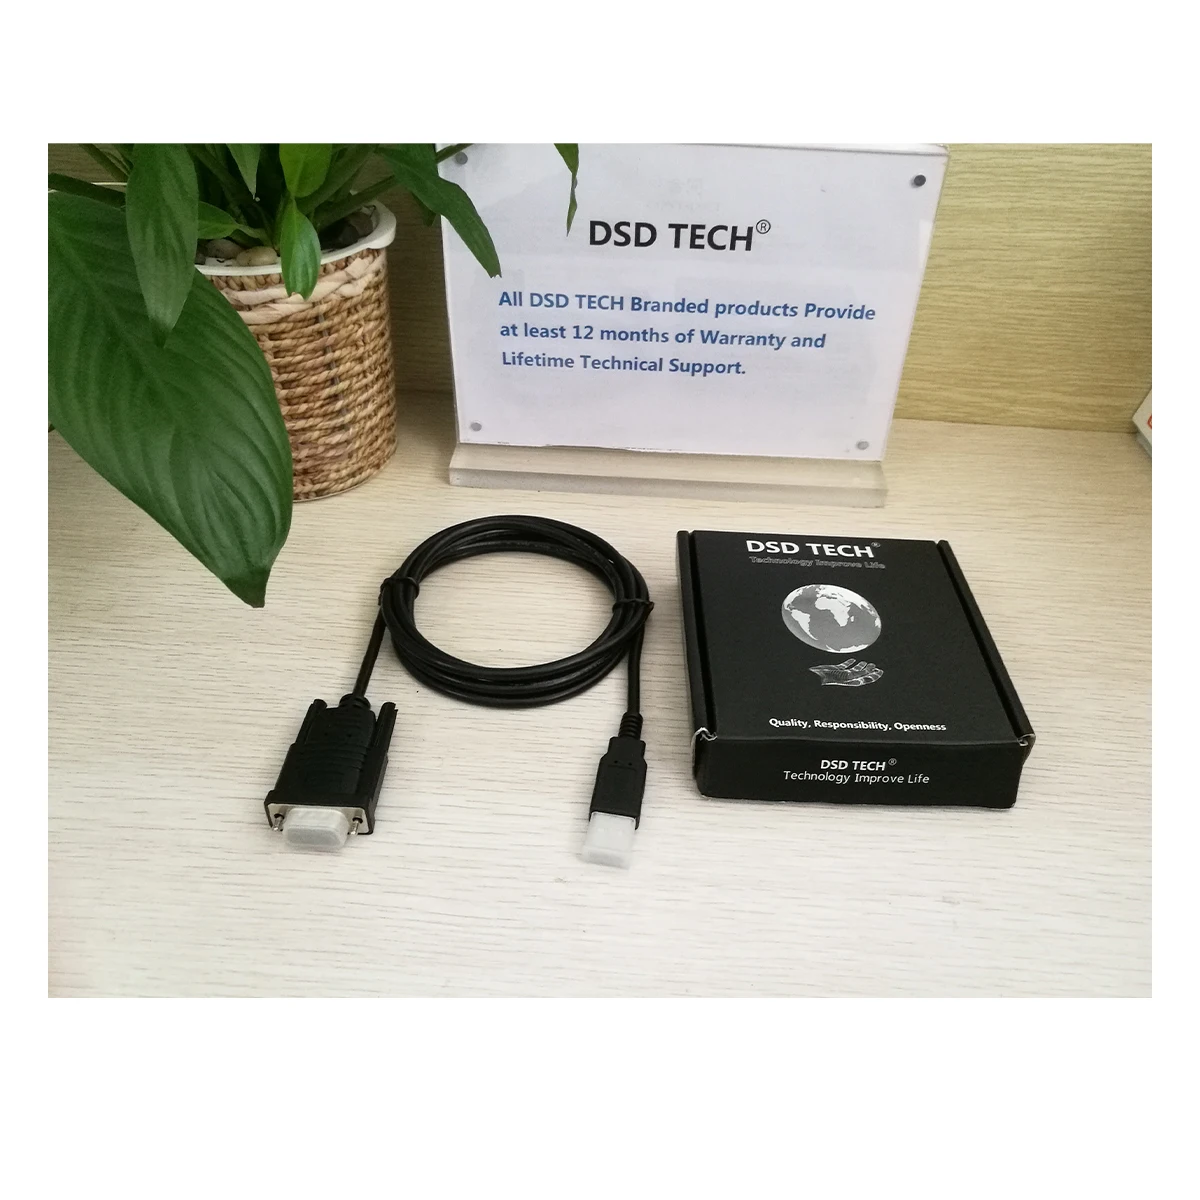 DSD TECH SH-RS232A USB to RS232 Serial DB9 Adapter Cable with FTDI FT232 Chip for Windows,Linux,Mac OS 5.9FT/1.8M